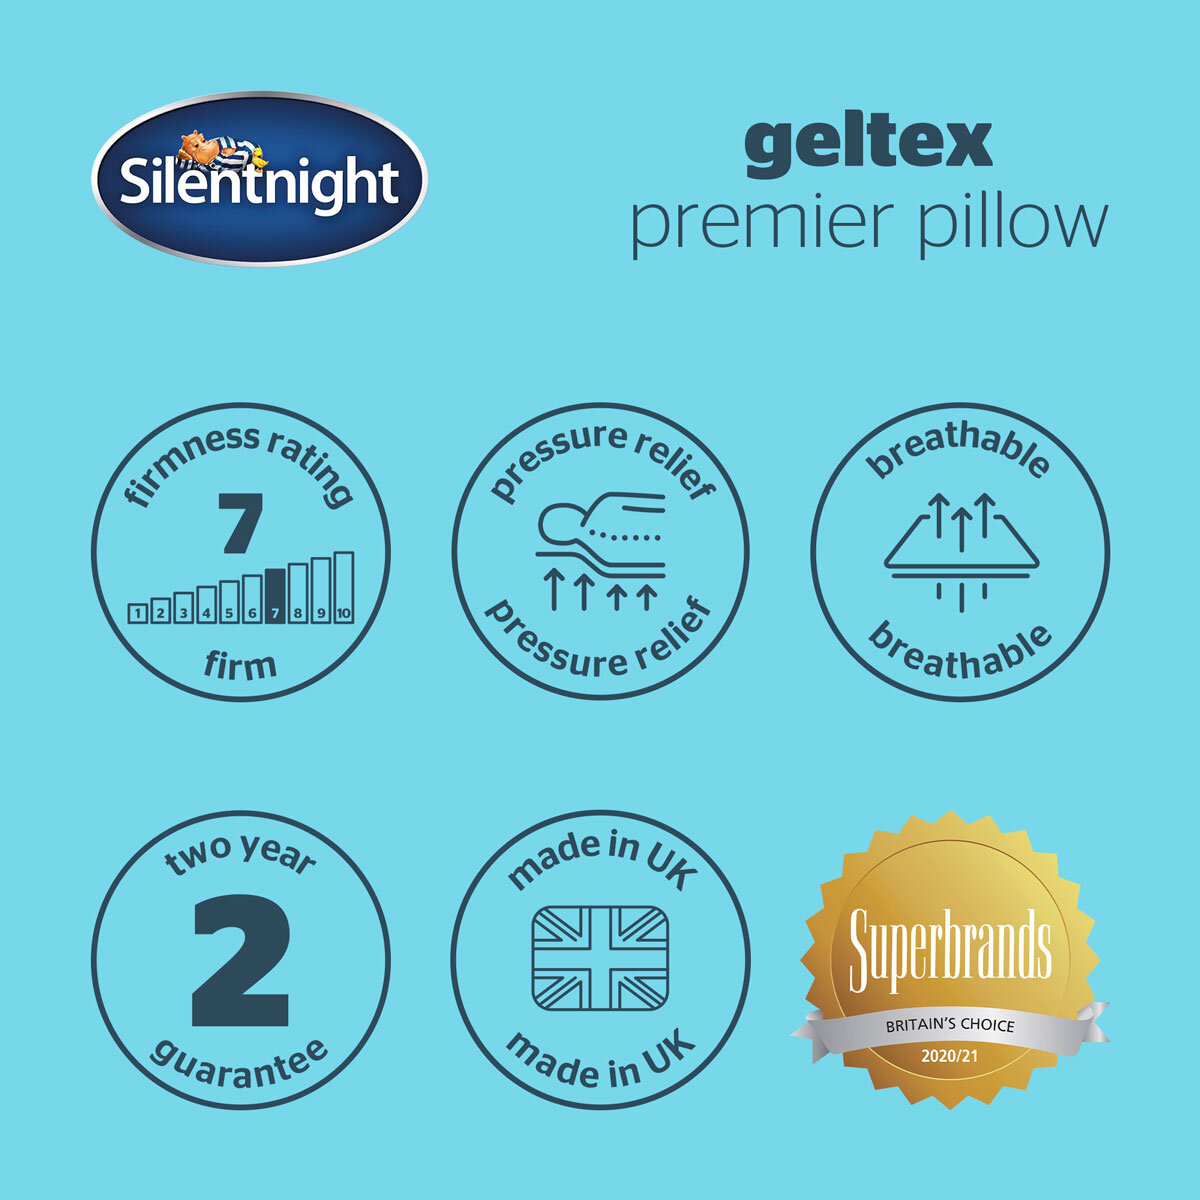 Silentnight geltex pillow two pack information call outs